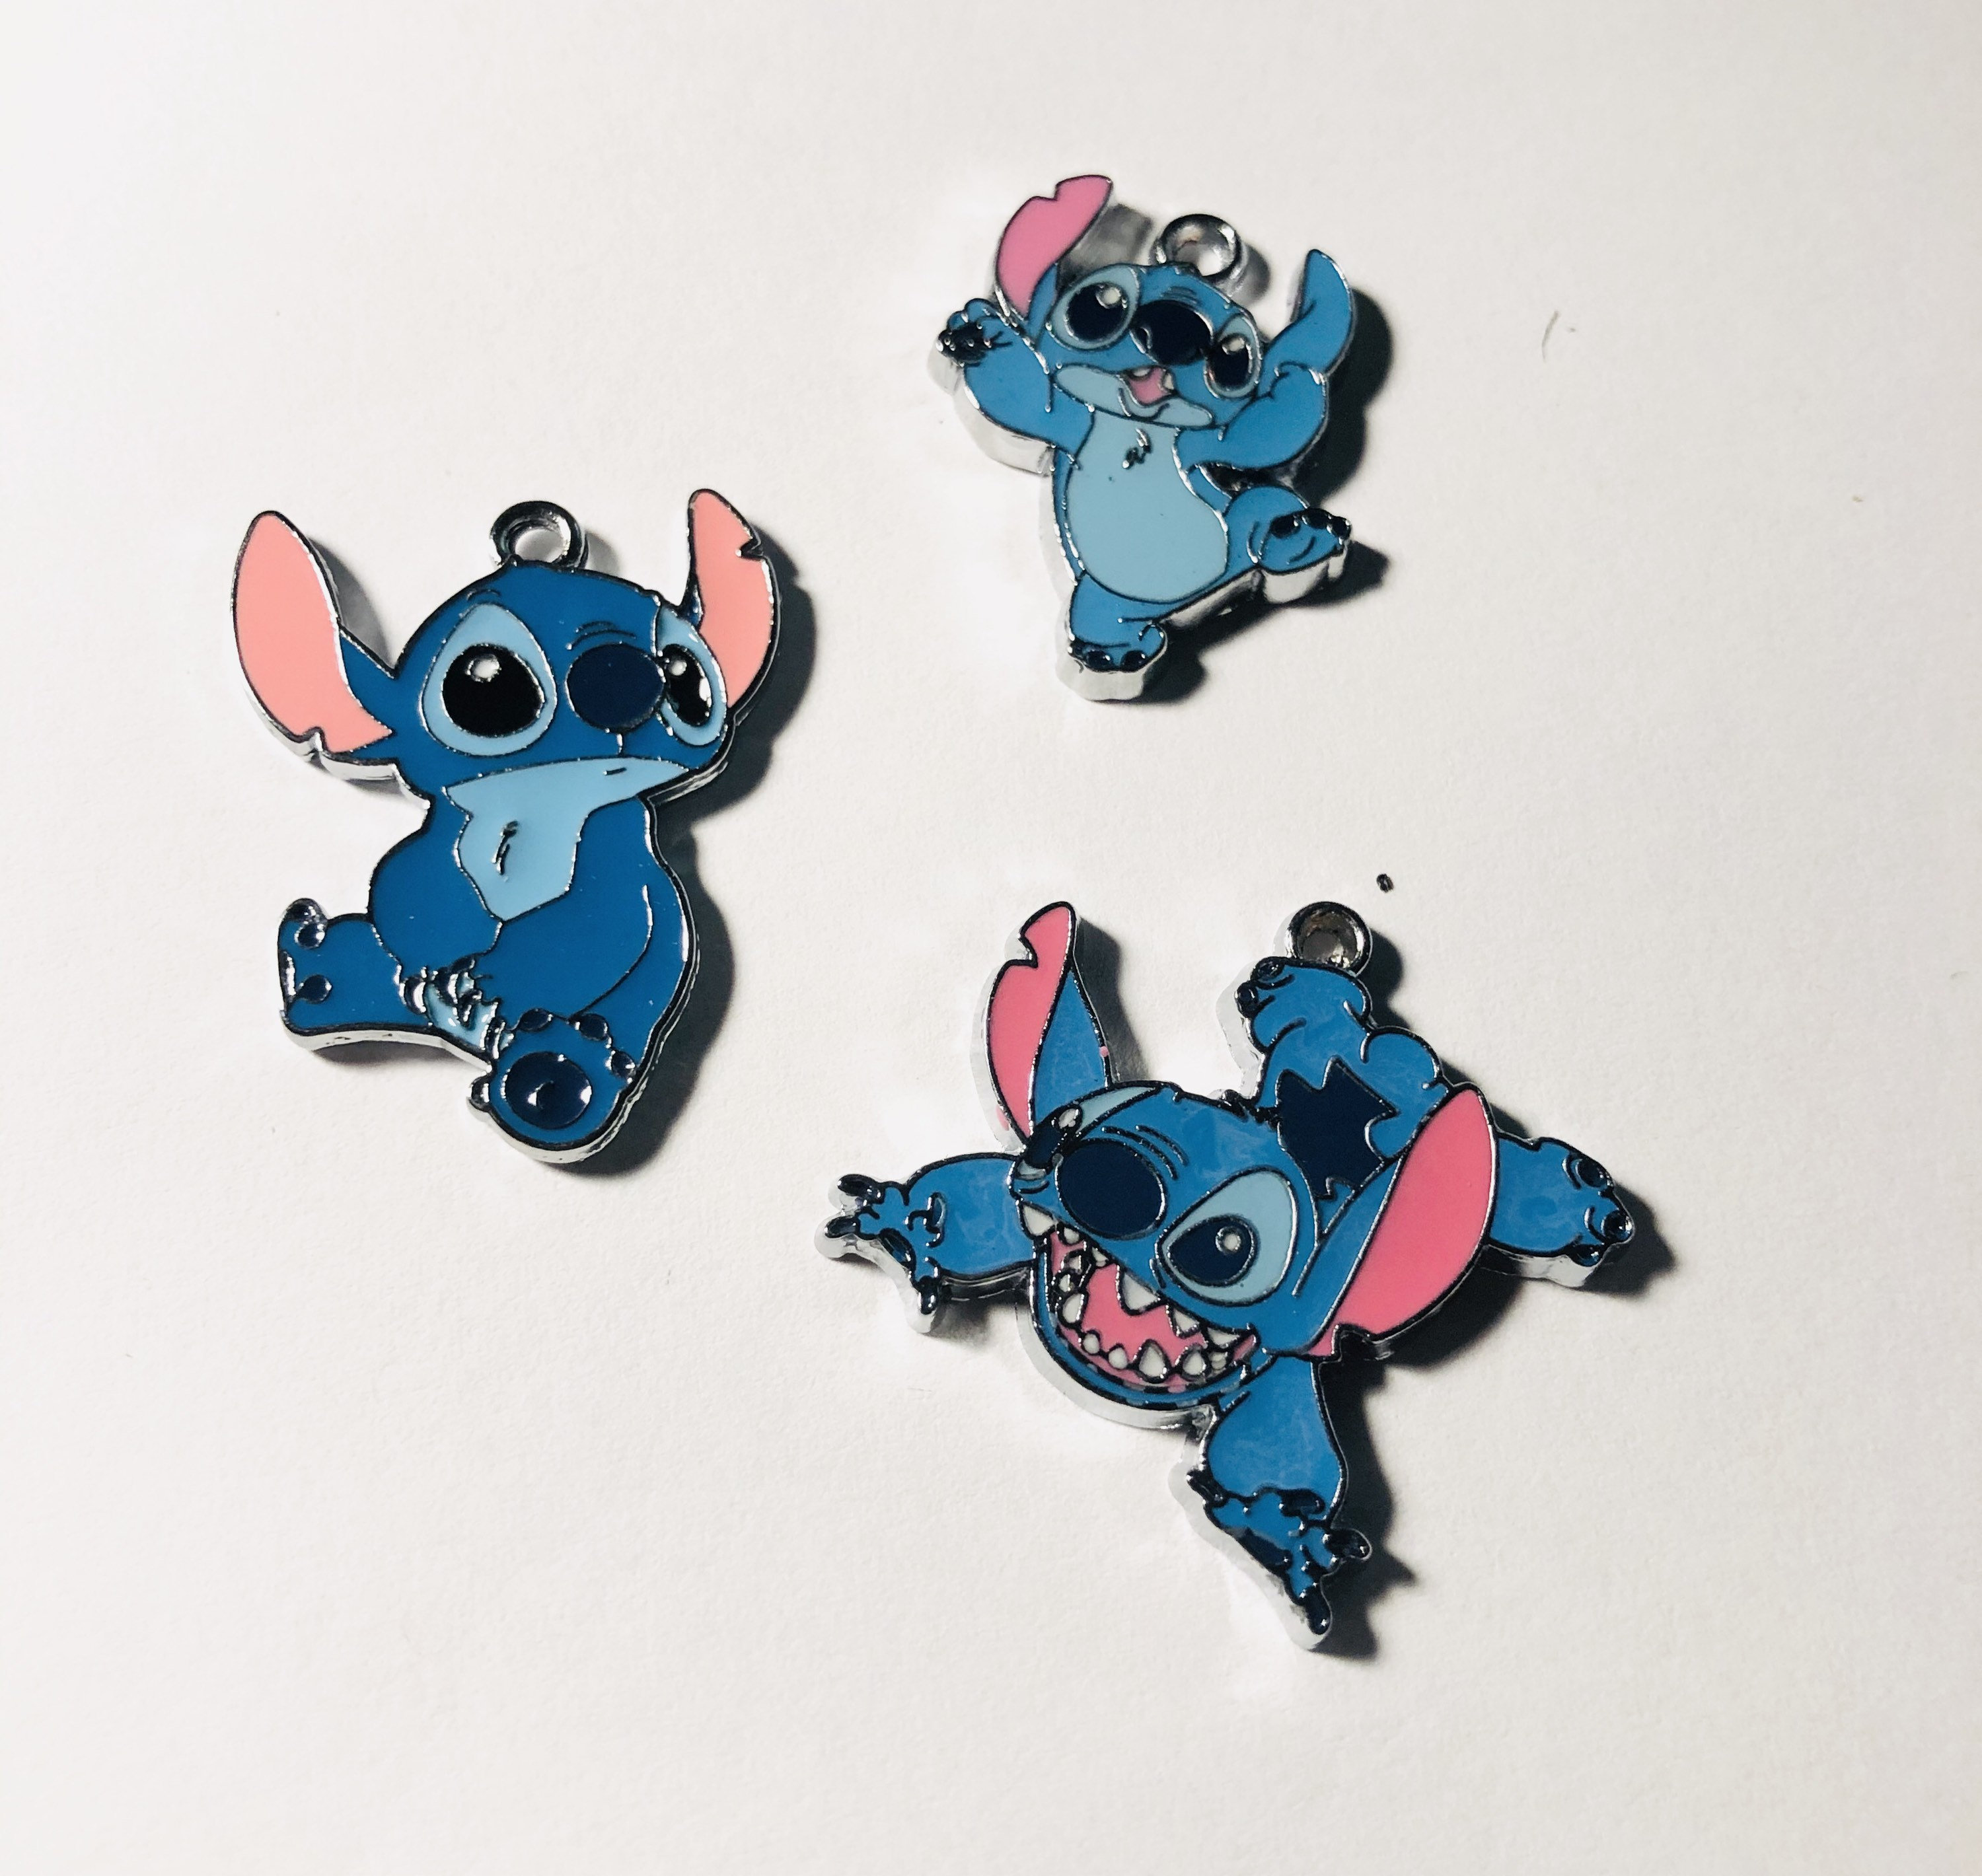 SUU 14pcs Anime Stitch Charms for Jewelry Making, Enamel Cartoon Stitch Pendant Charm for Bracelets and Necklaces or Earrings Crafting, Assorted Charm